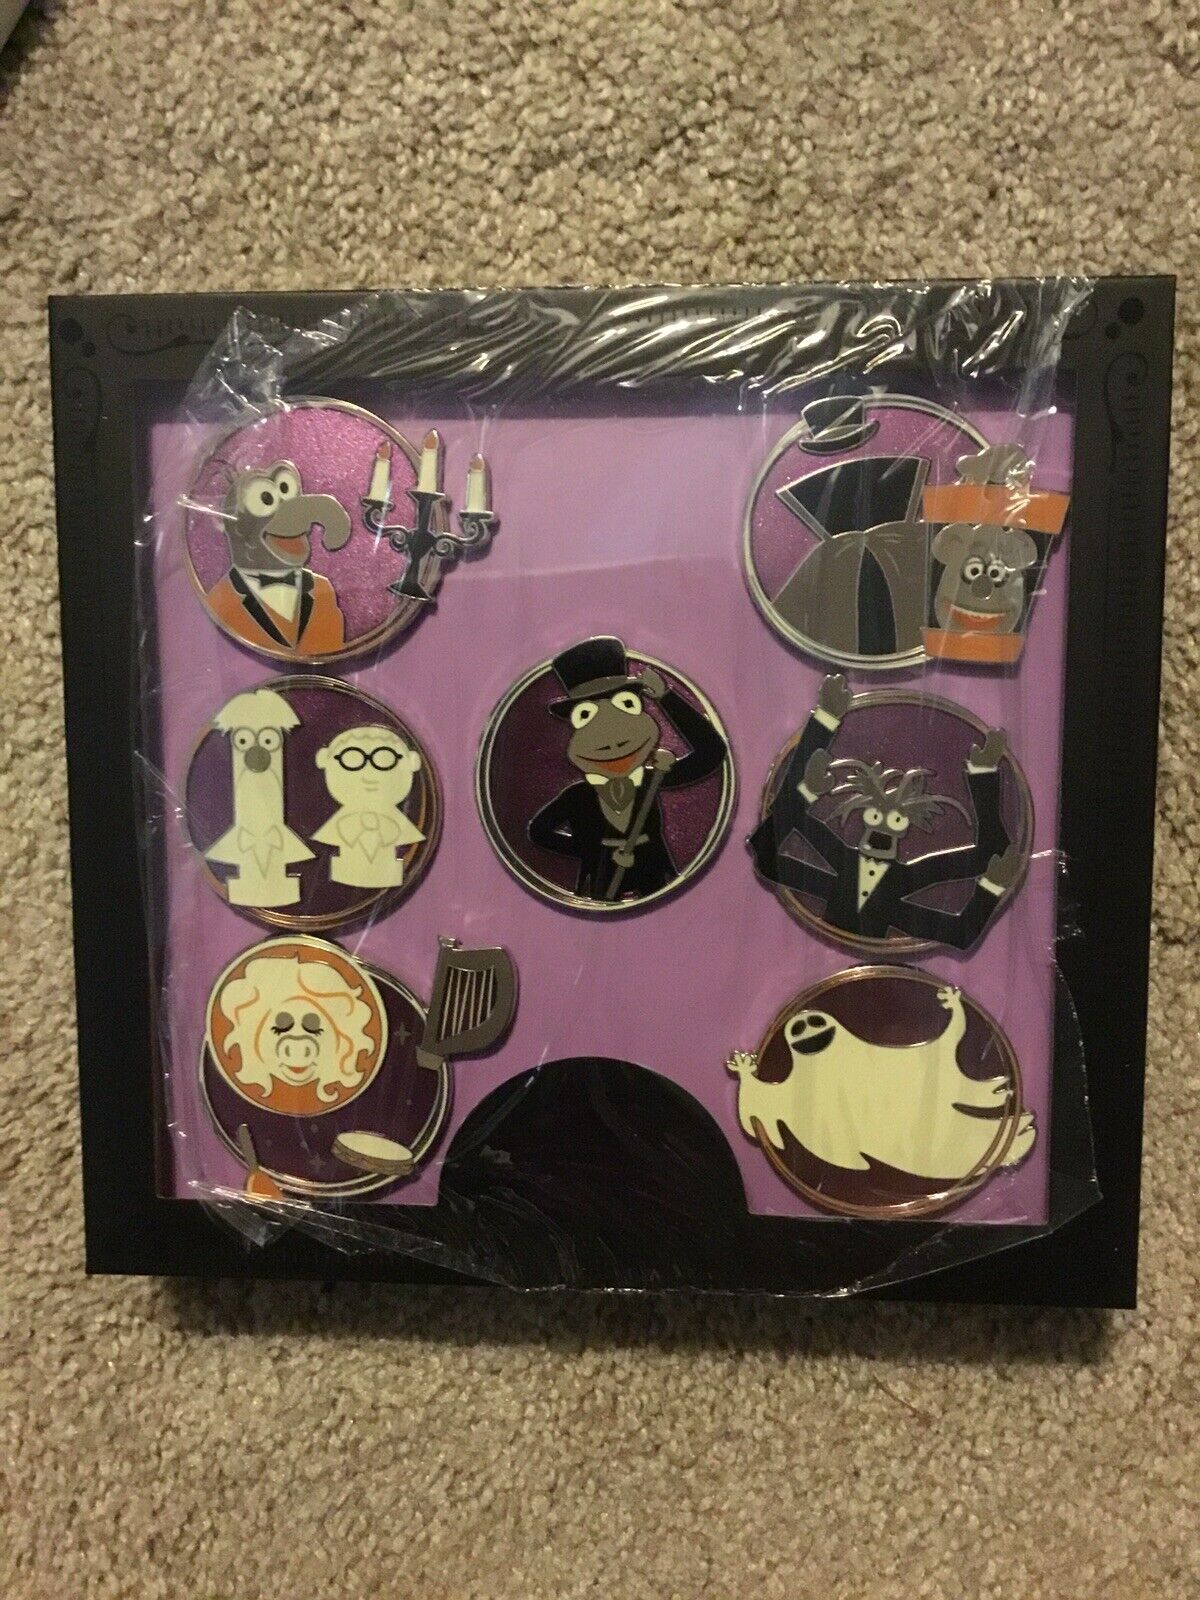 Disney D23 Gold Member Exclusive Muppets Haunted Mansion Wdi Pin Set Le 999